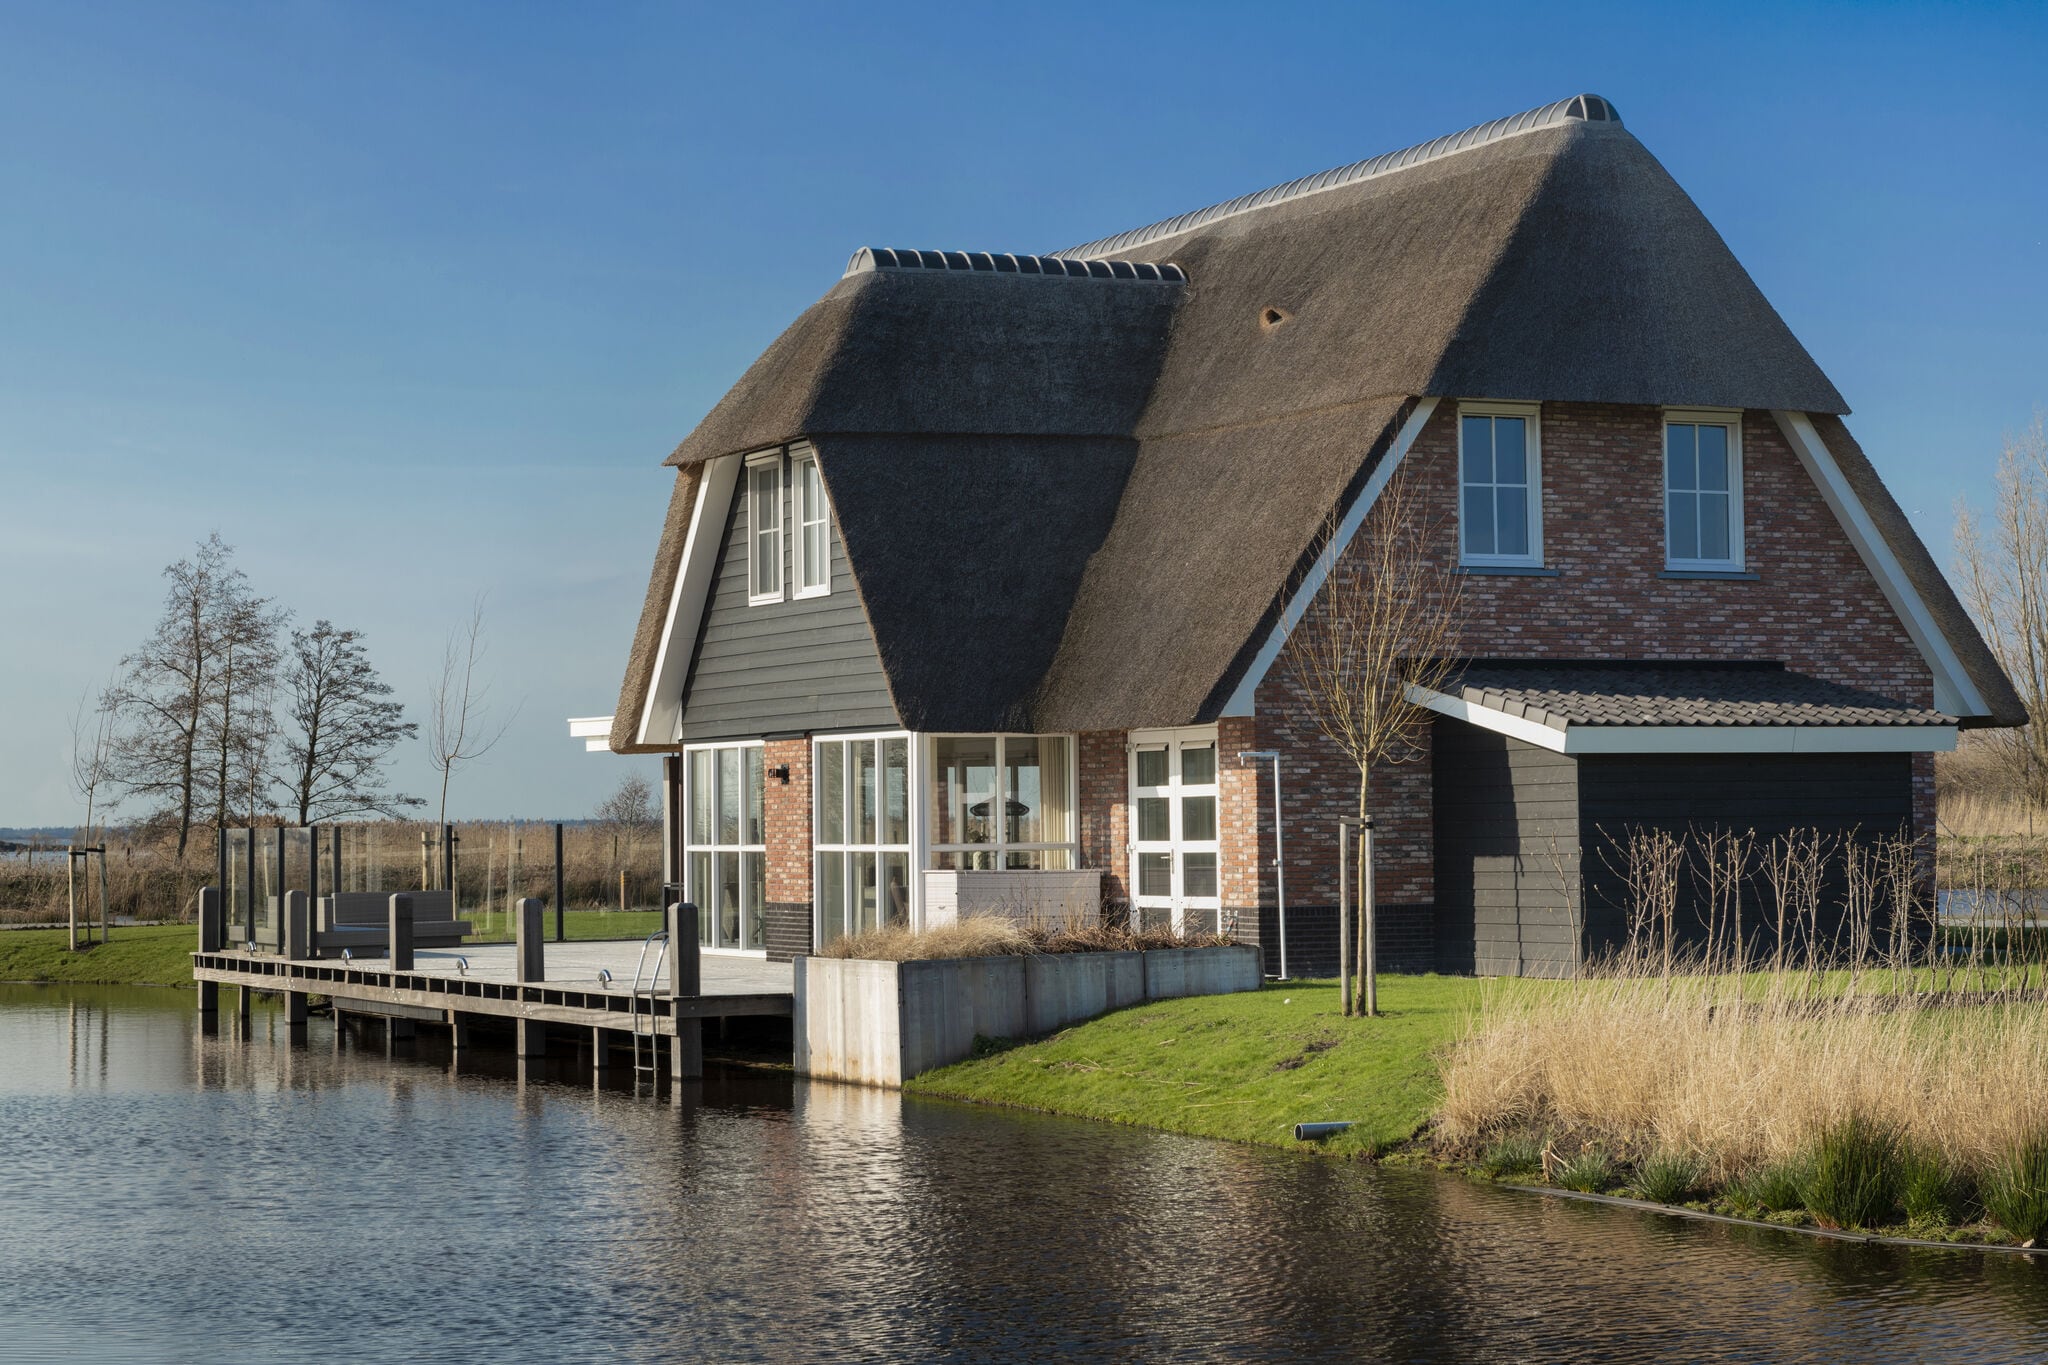 Thatched Villa with a sauna at Tjeukemeer